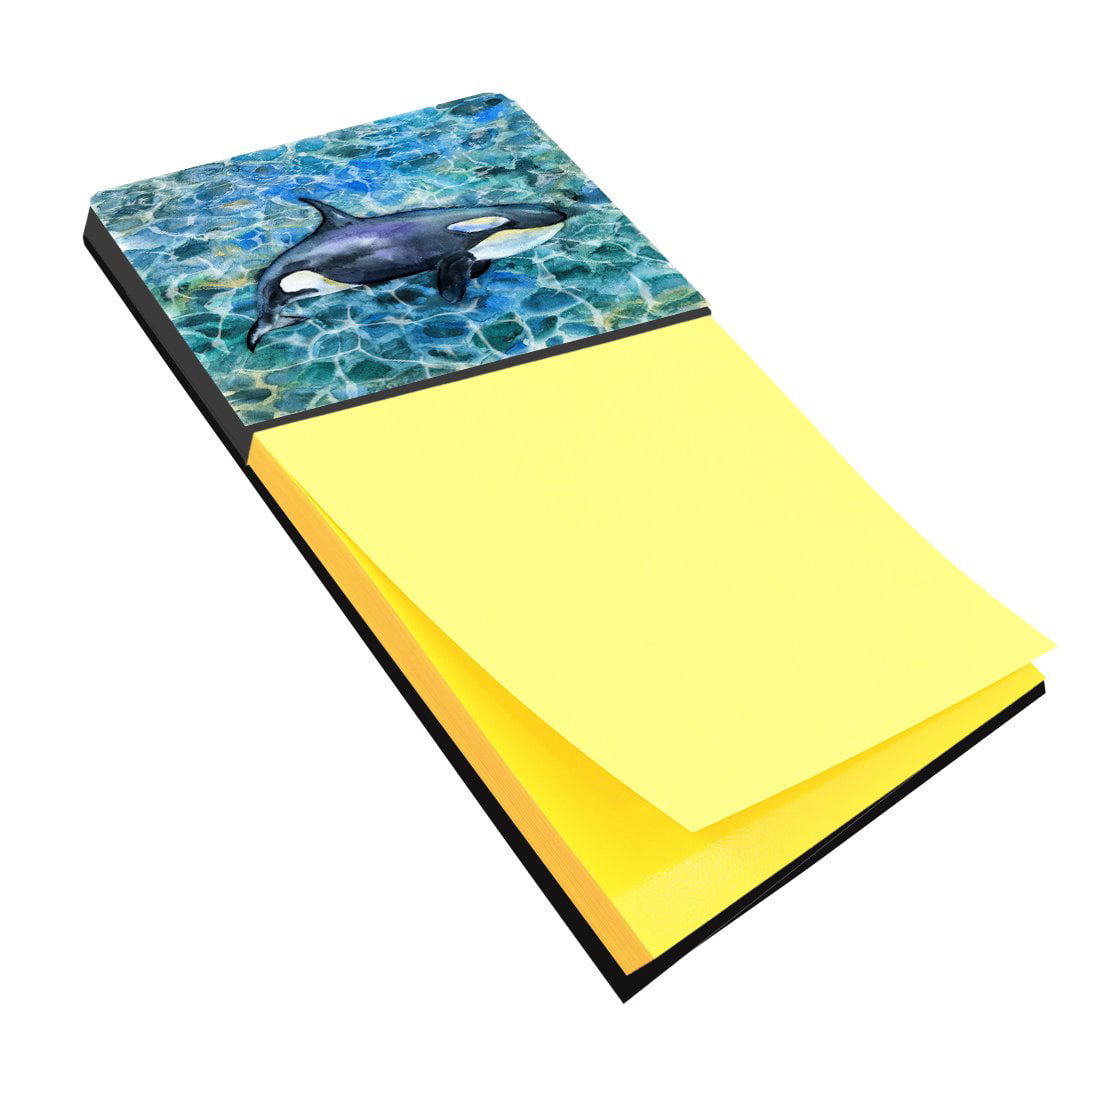 Bb5334sn Killer Whale Orca Sticky Note Holder